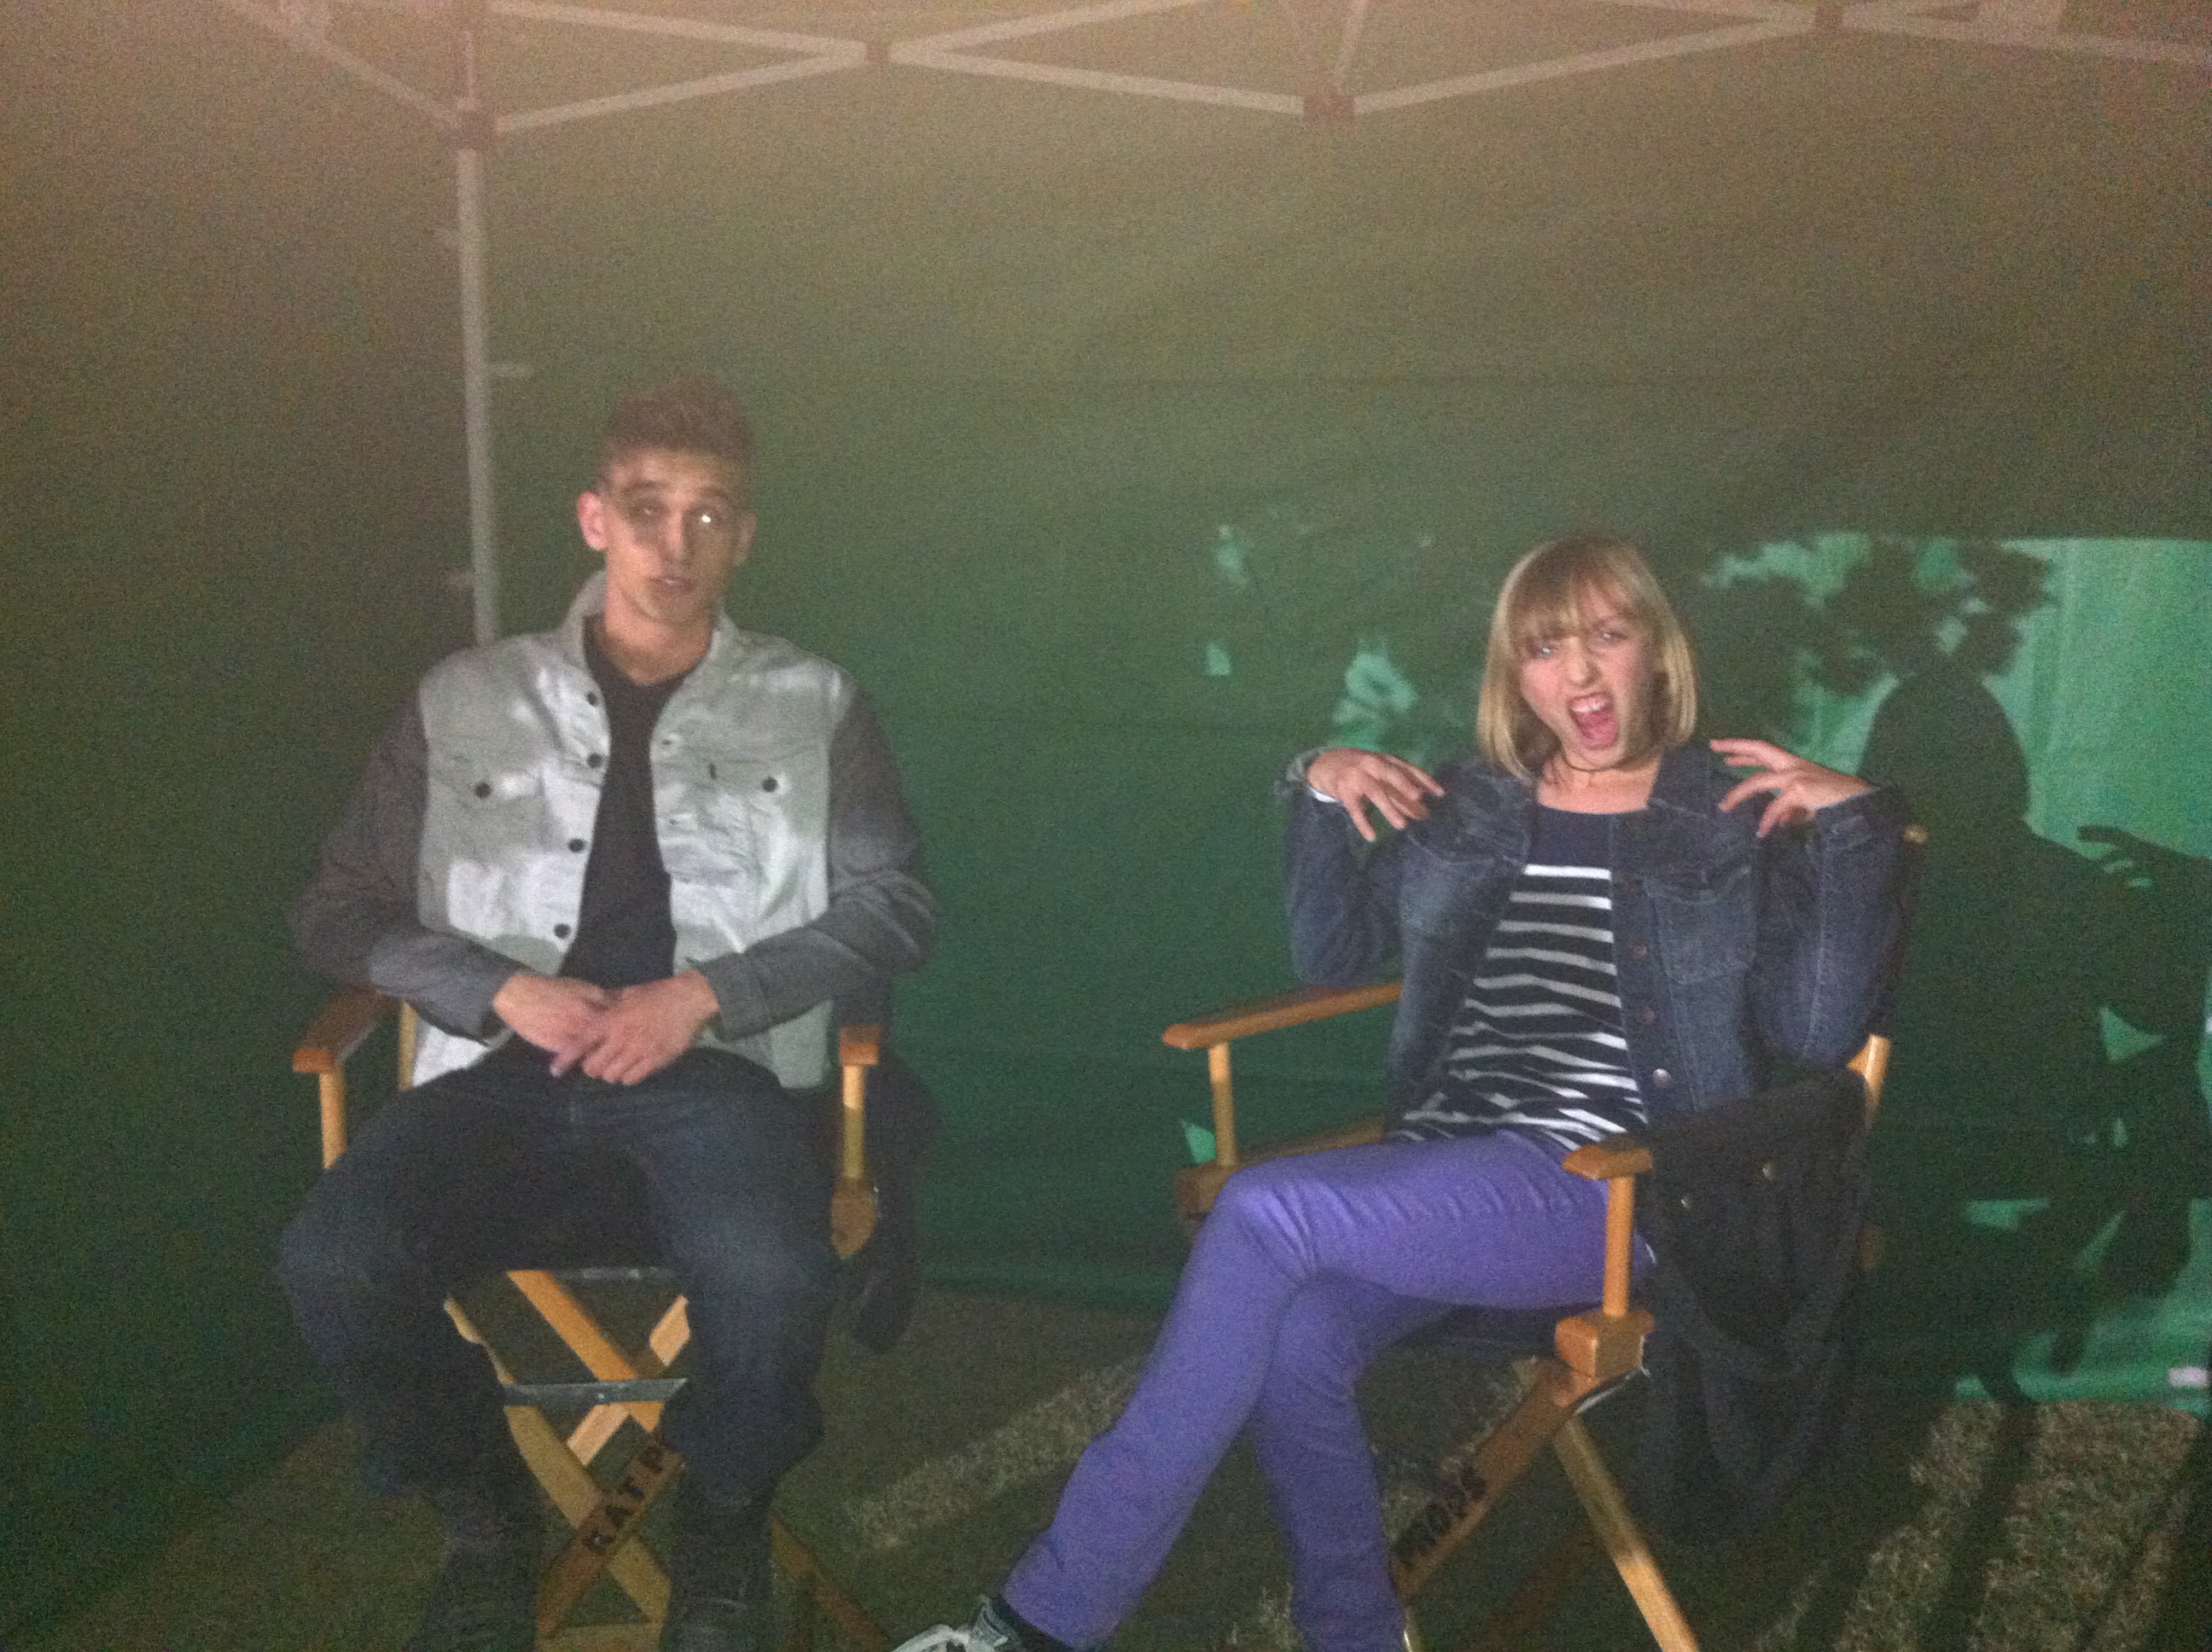 Lily Bleu Andrew and Cody Saintgnue on the set of MTV's Teen Wolf.